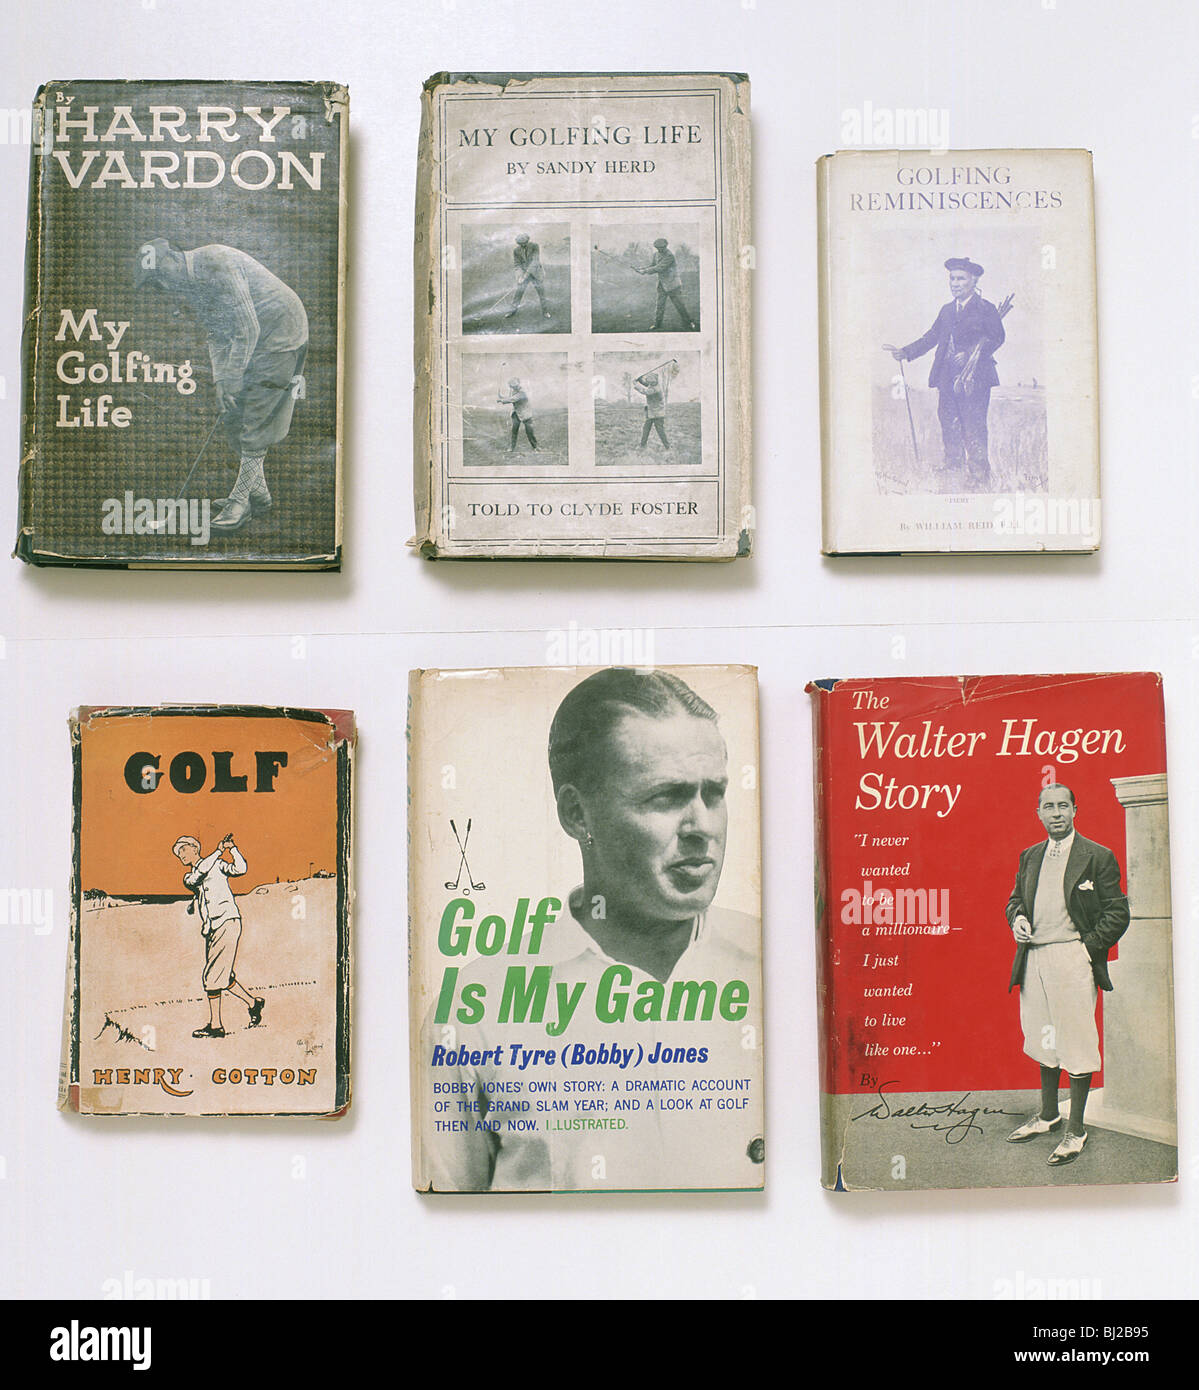 Golfing Books C1910 C1930 Stock Photo Royalty Free Image within The Most Awesome  golfing books regarding Your property